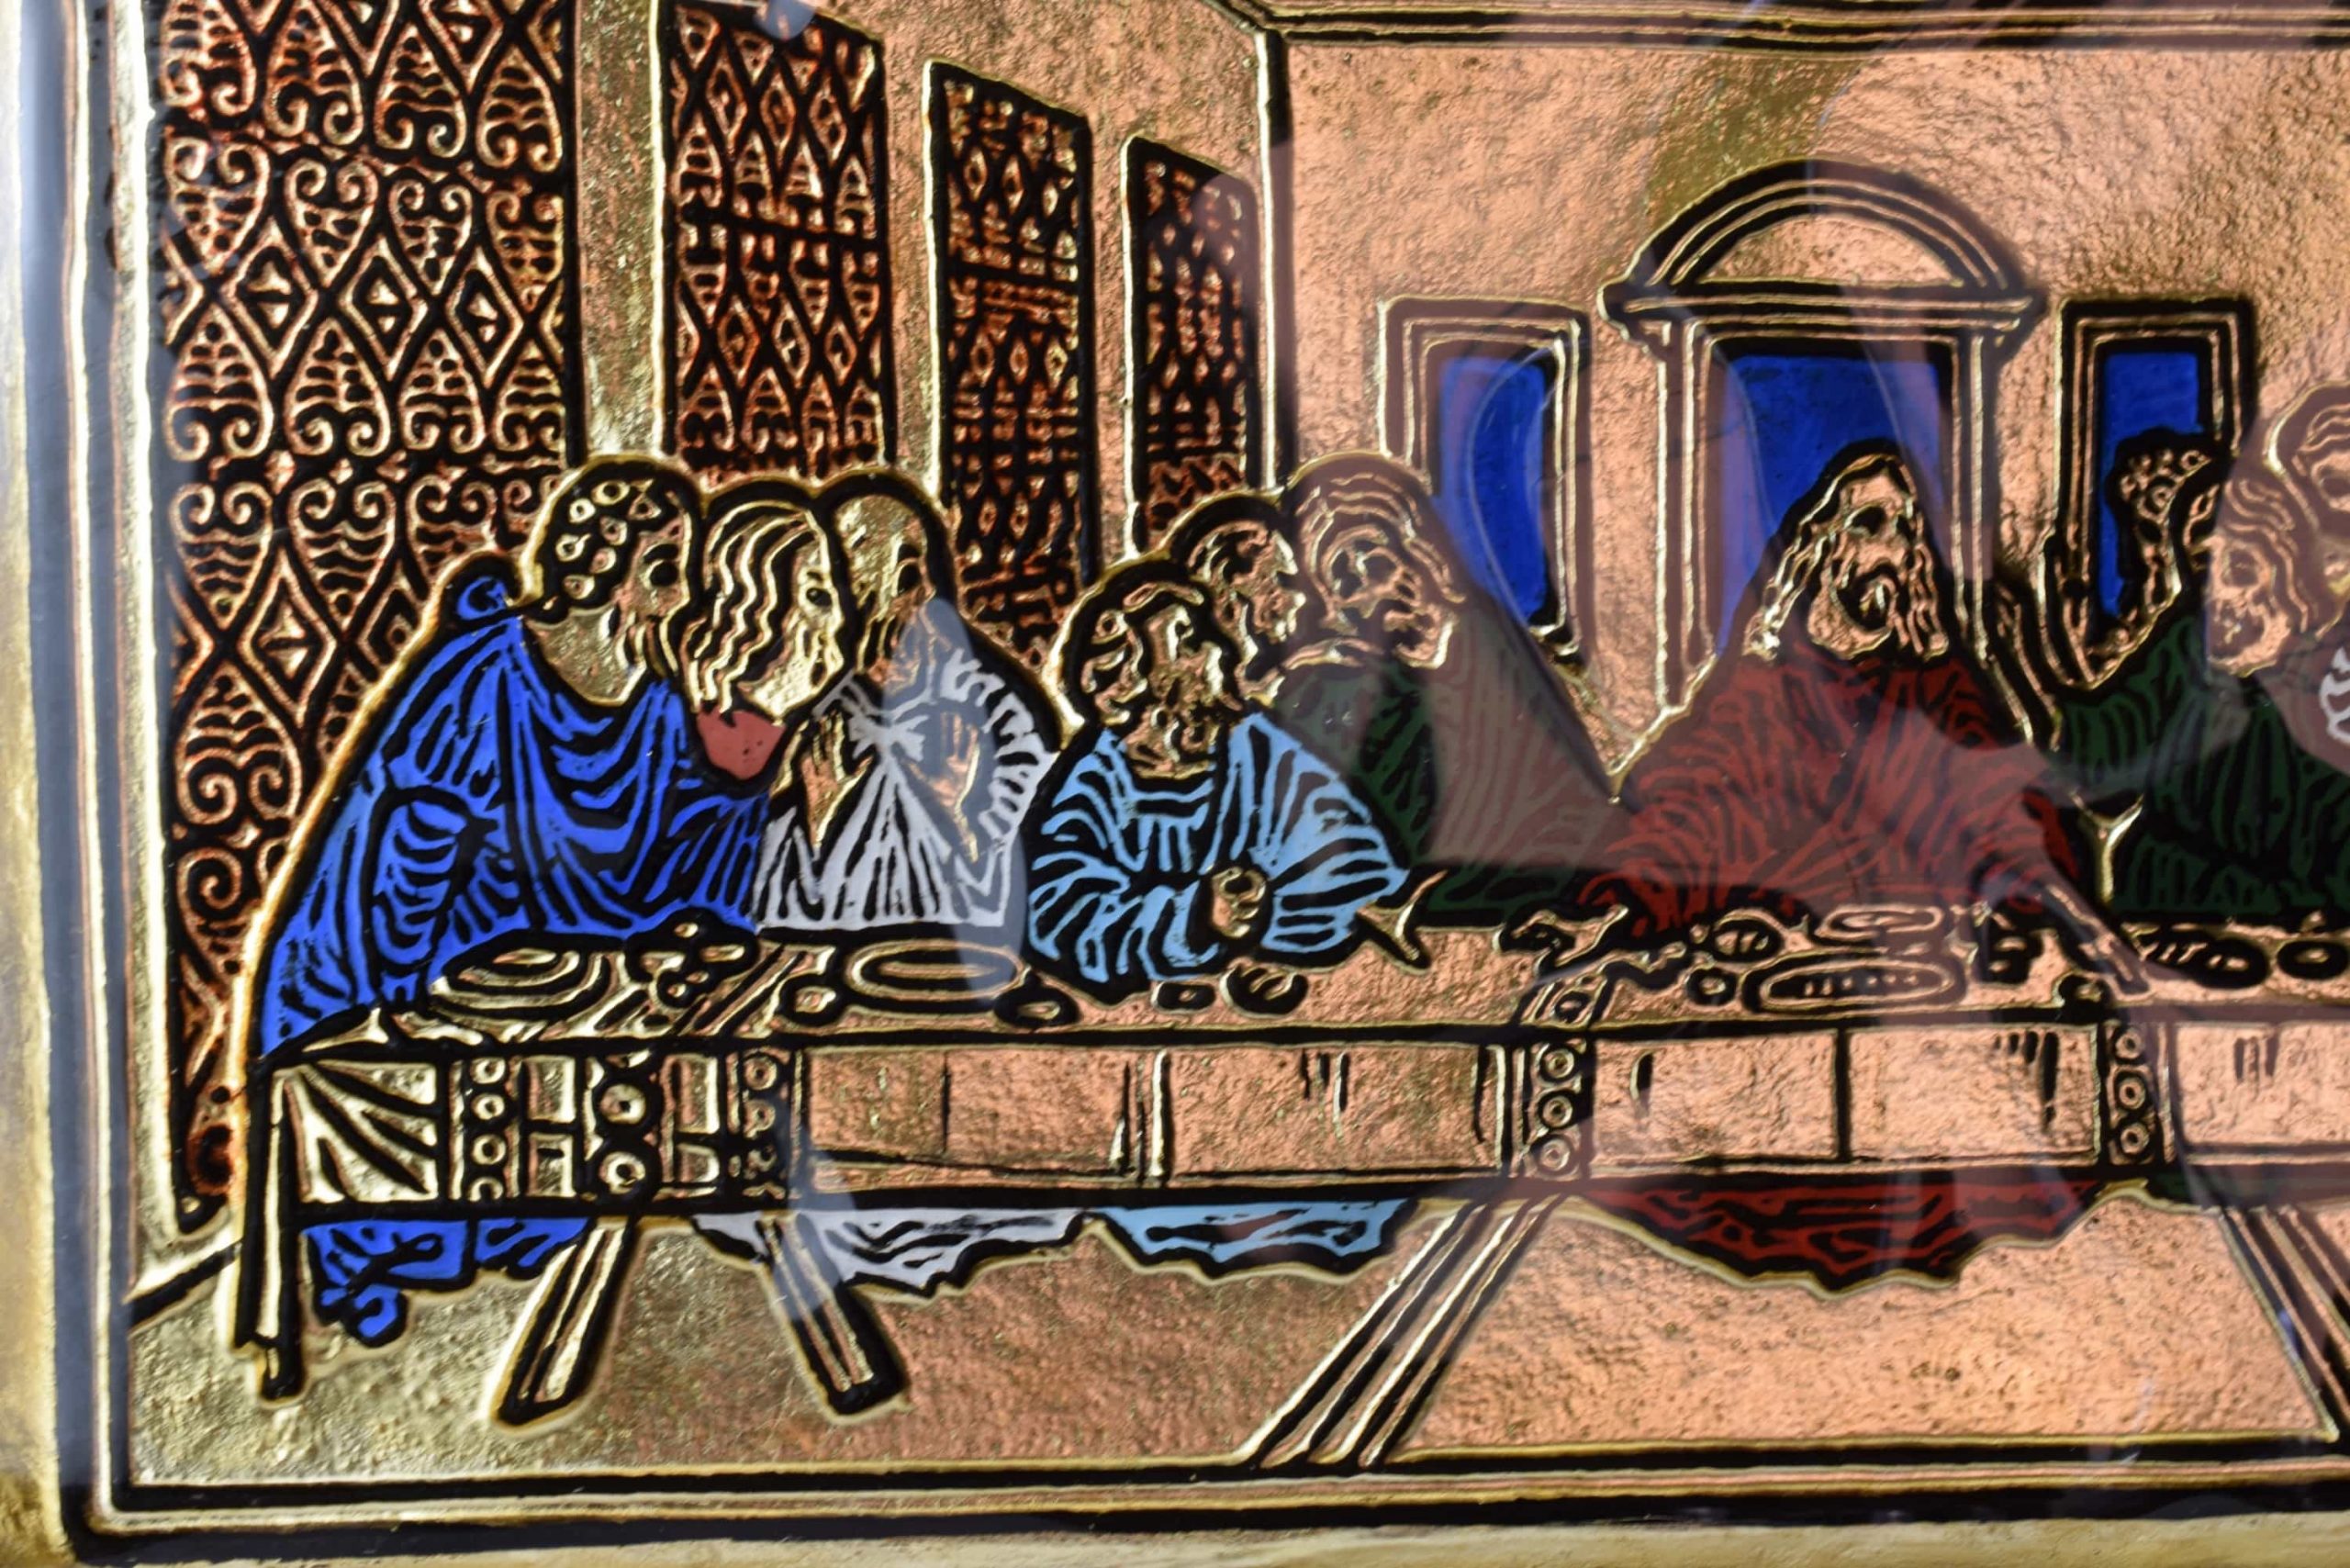 Murano glass painting "The Last Supper" (Art. 1173)